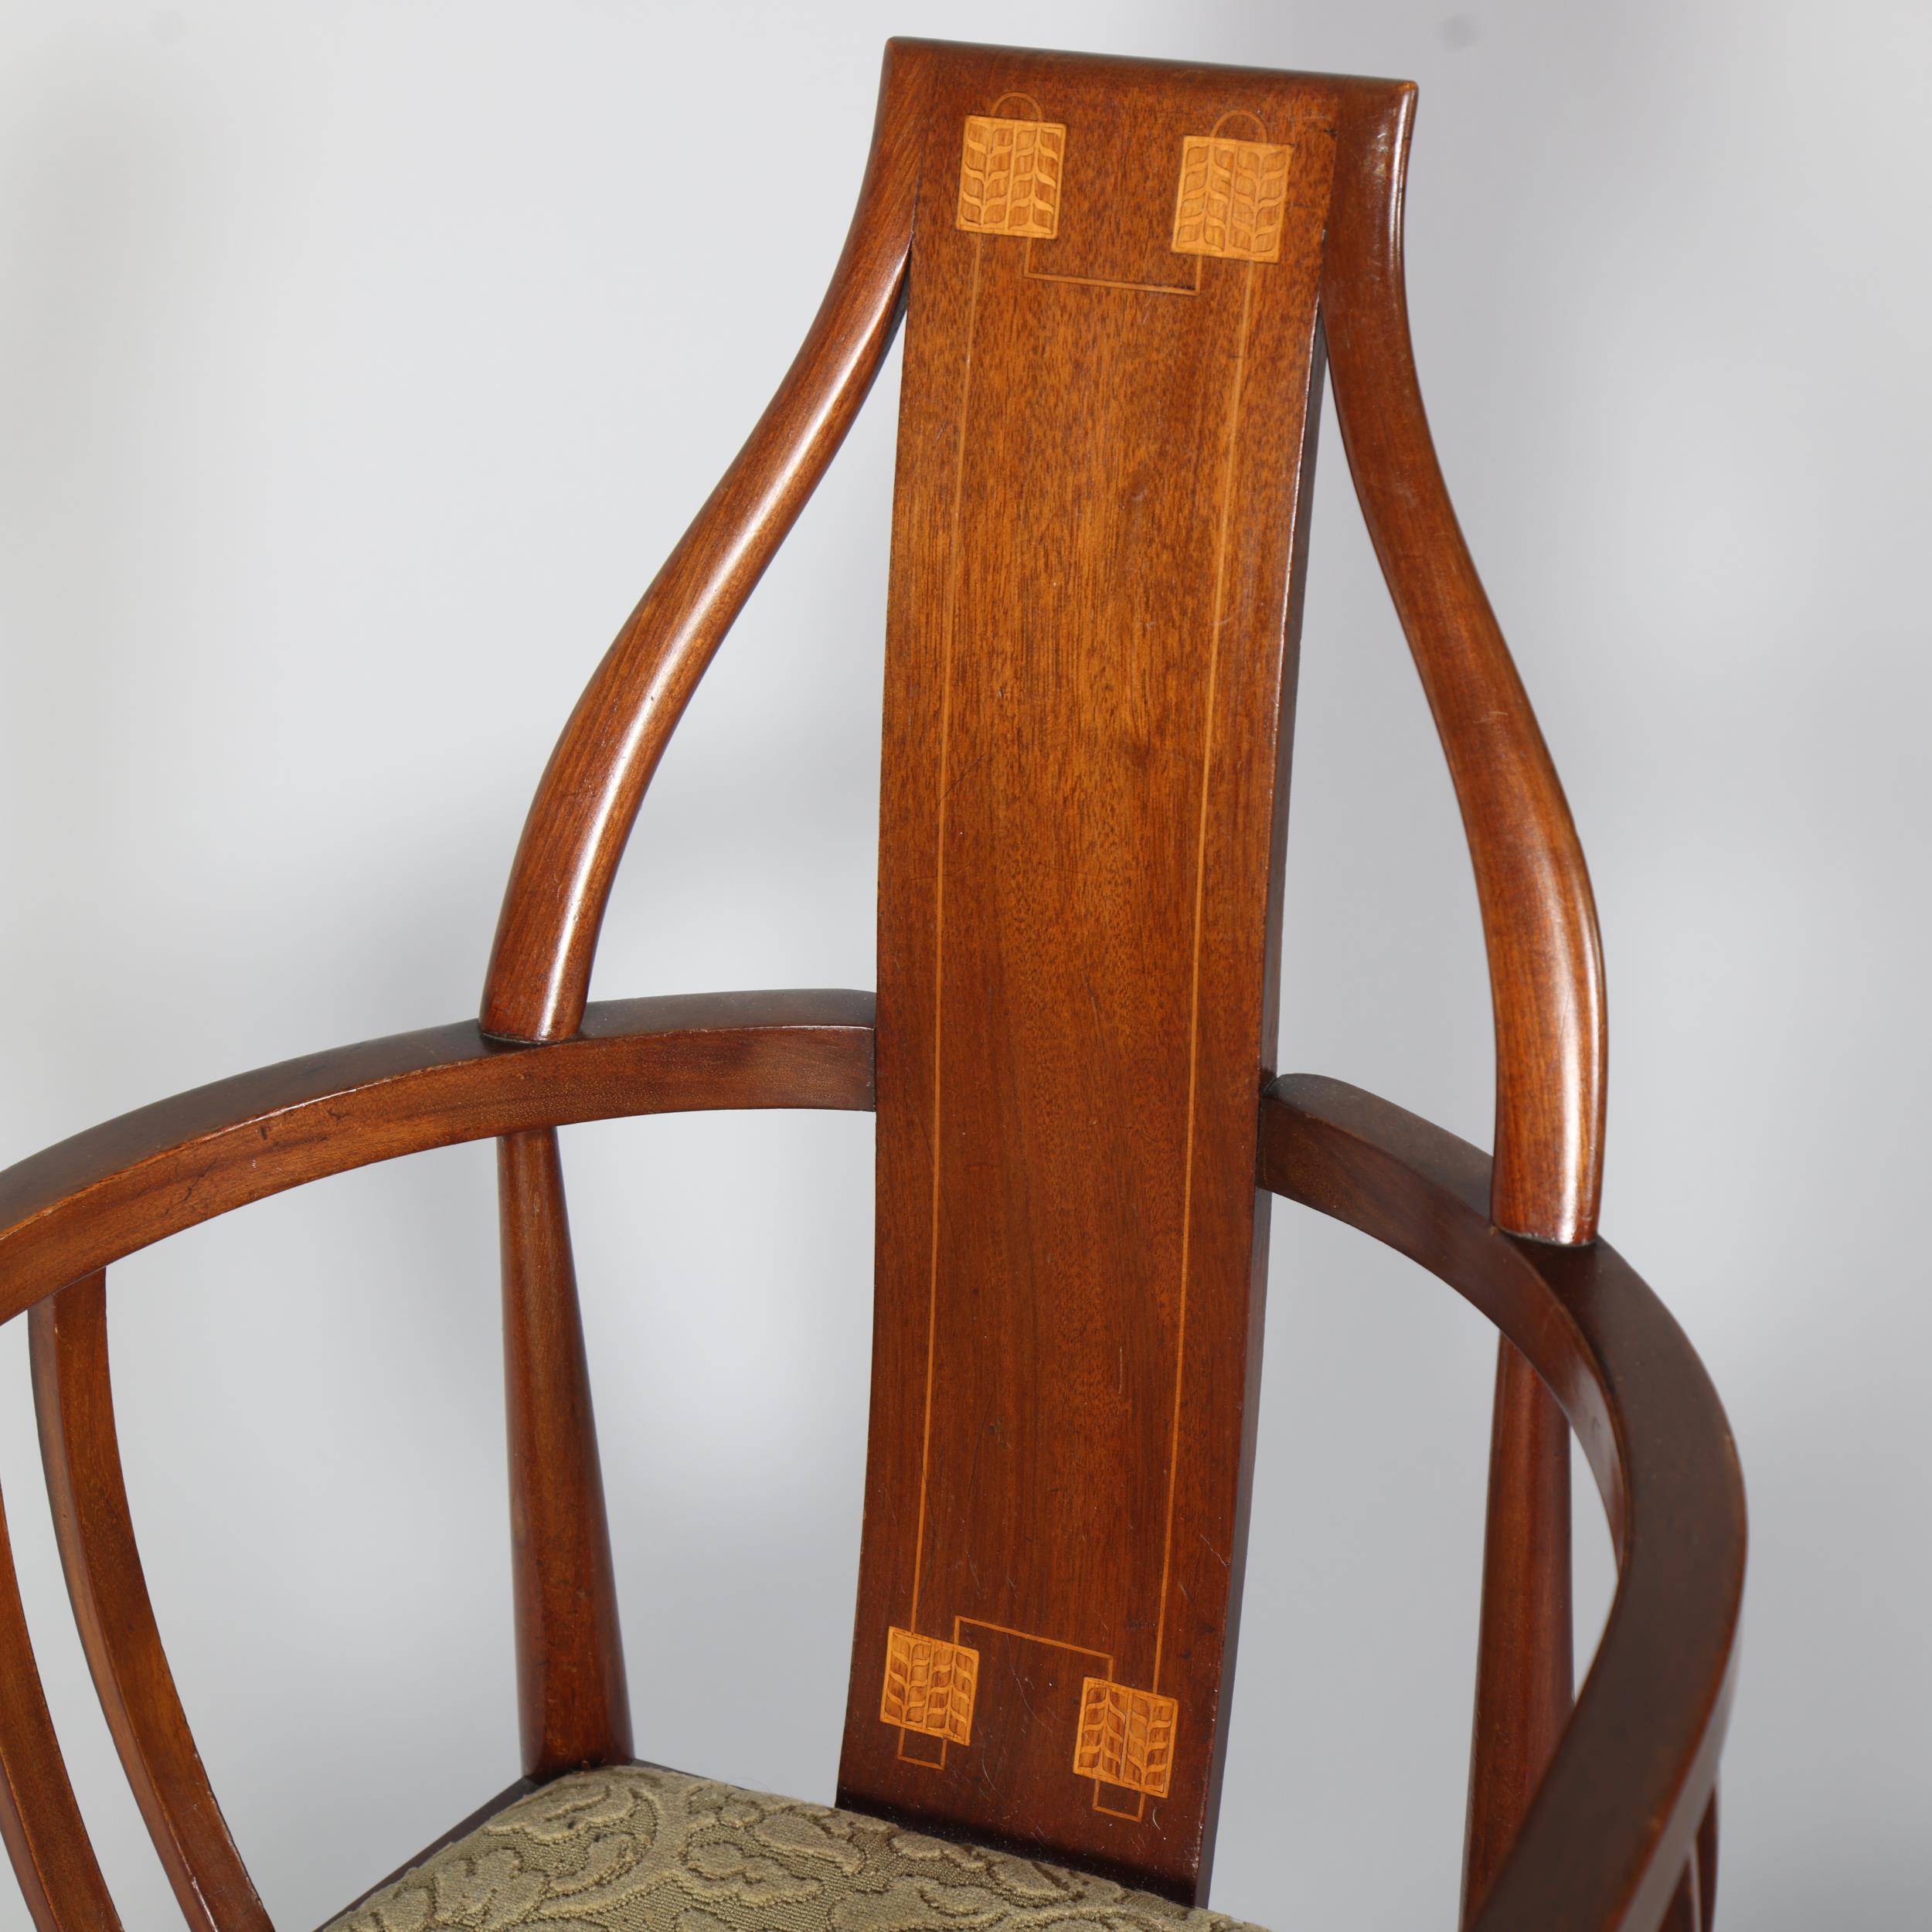 Scottish Art Nouveau mahogany bow-arm hall chair, with marquetry inlaid back, height 97cm - Image 2 of 5